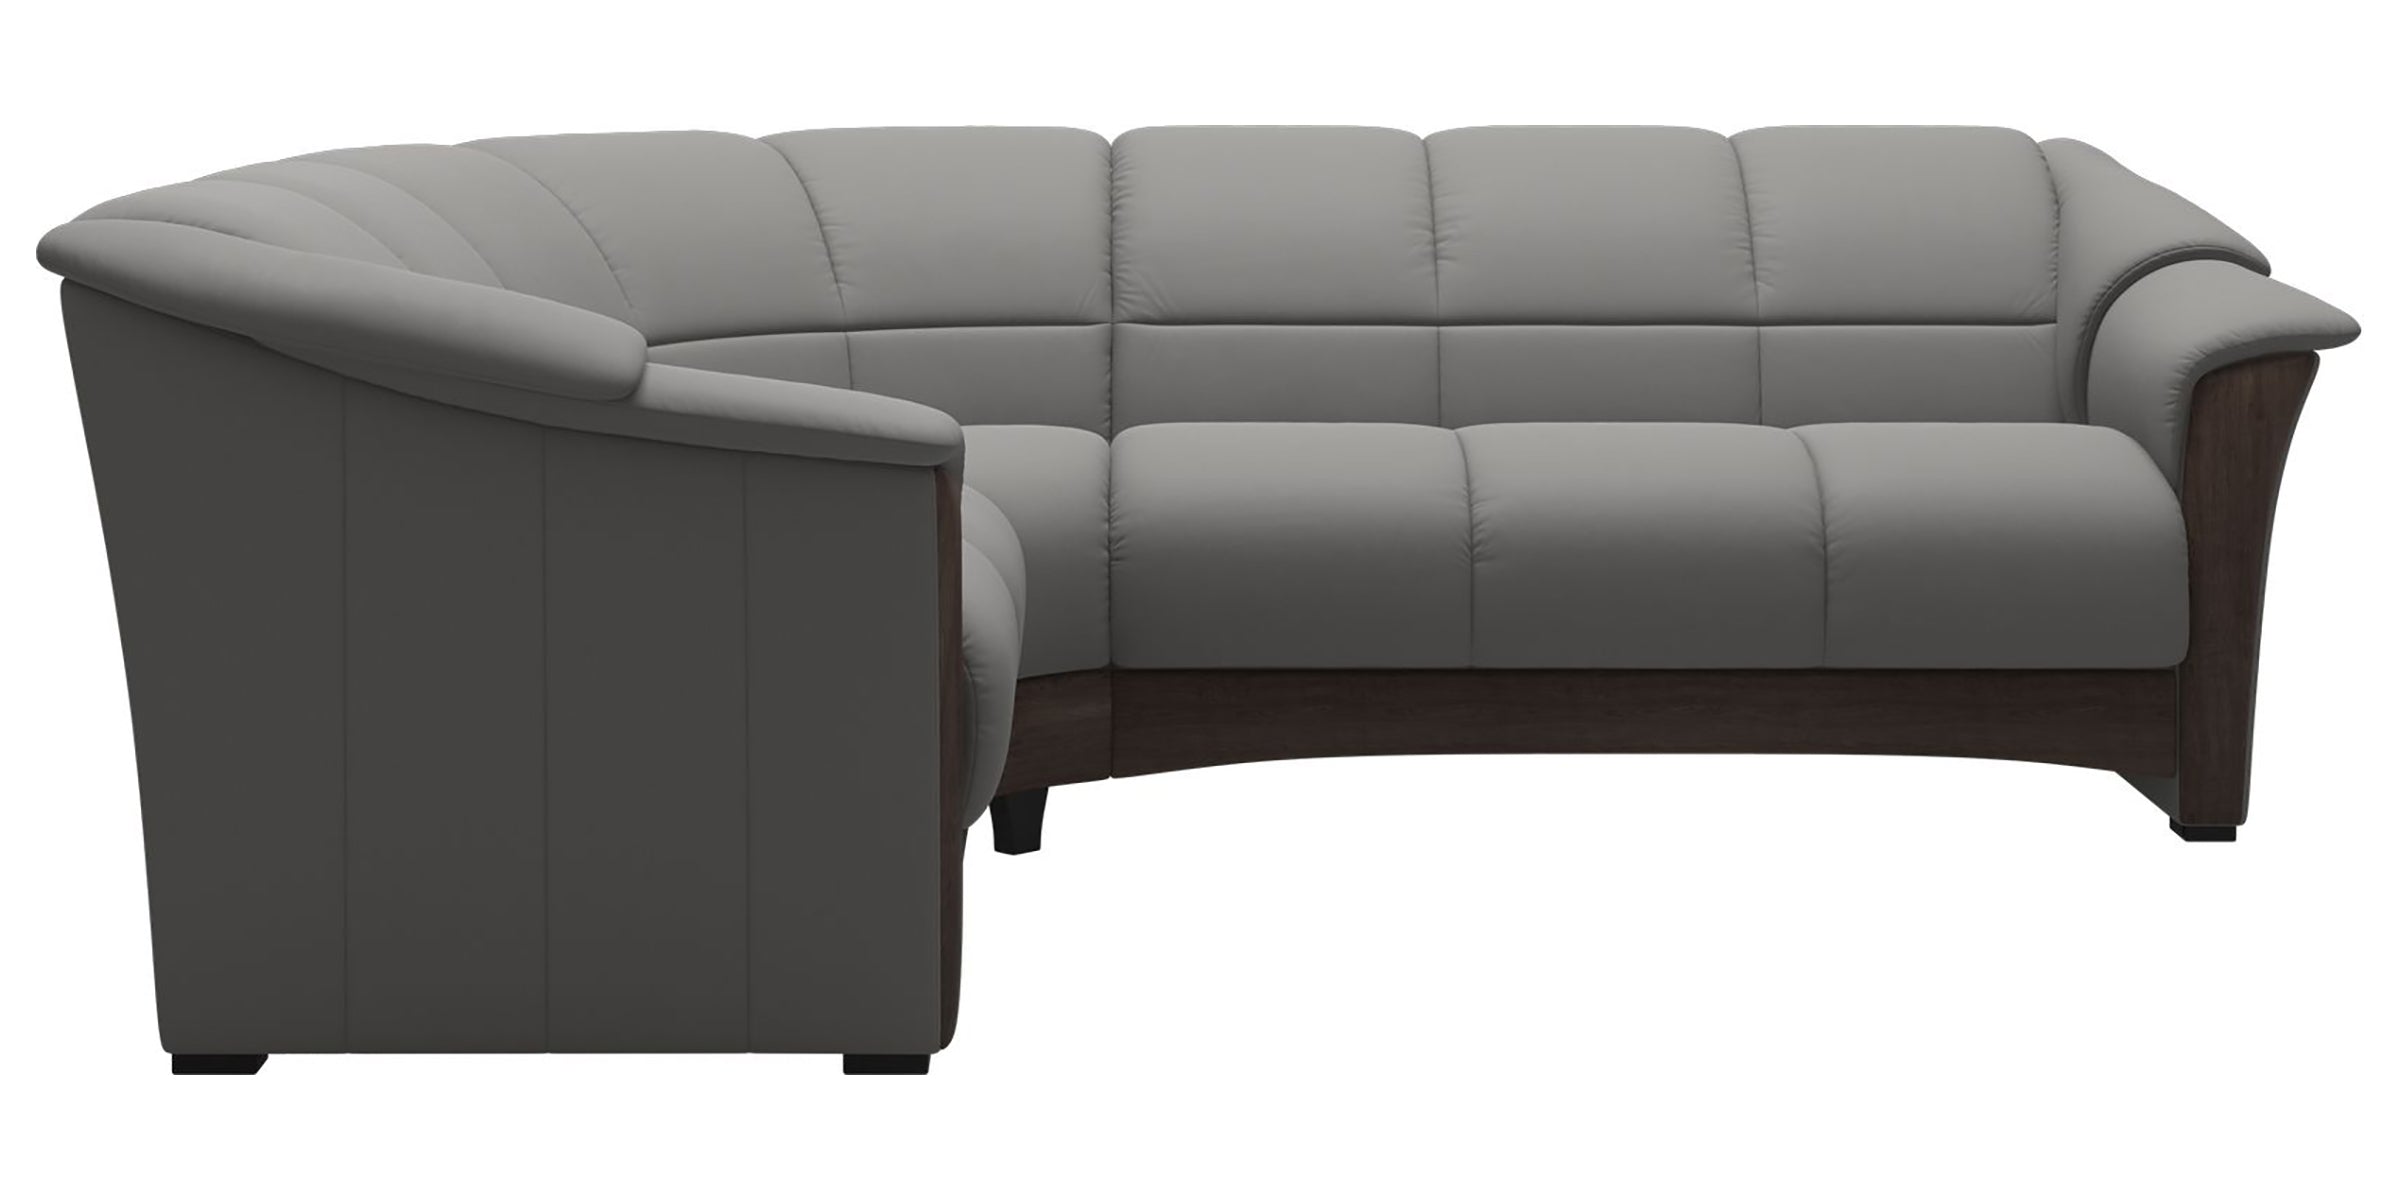 Paloma Leather Silver Grey and Wenge Base | Stressless Oslo Sectional | Valley Ridge Furniture